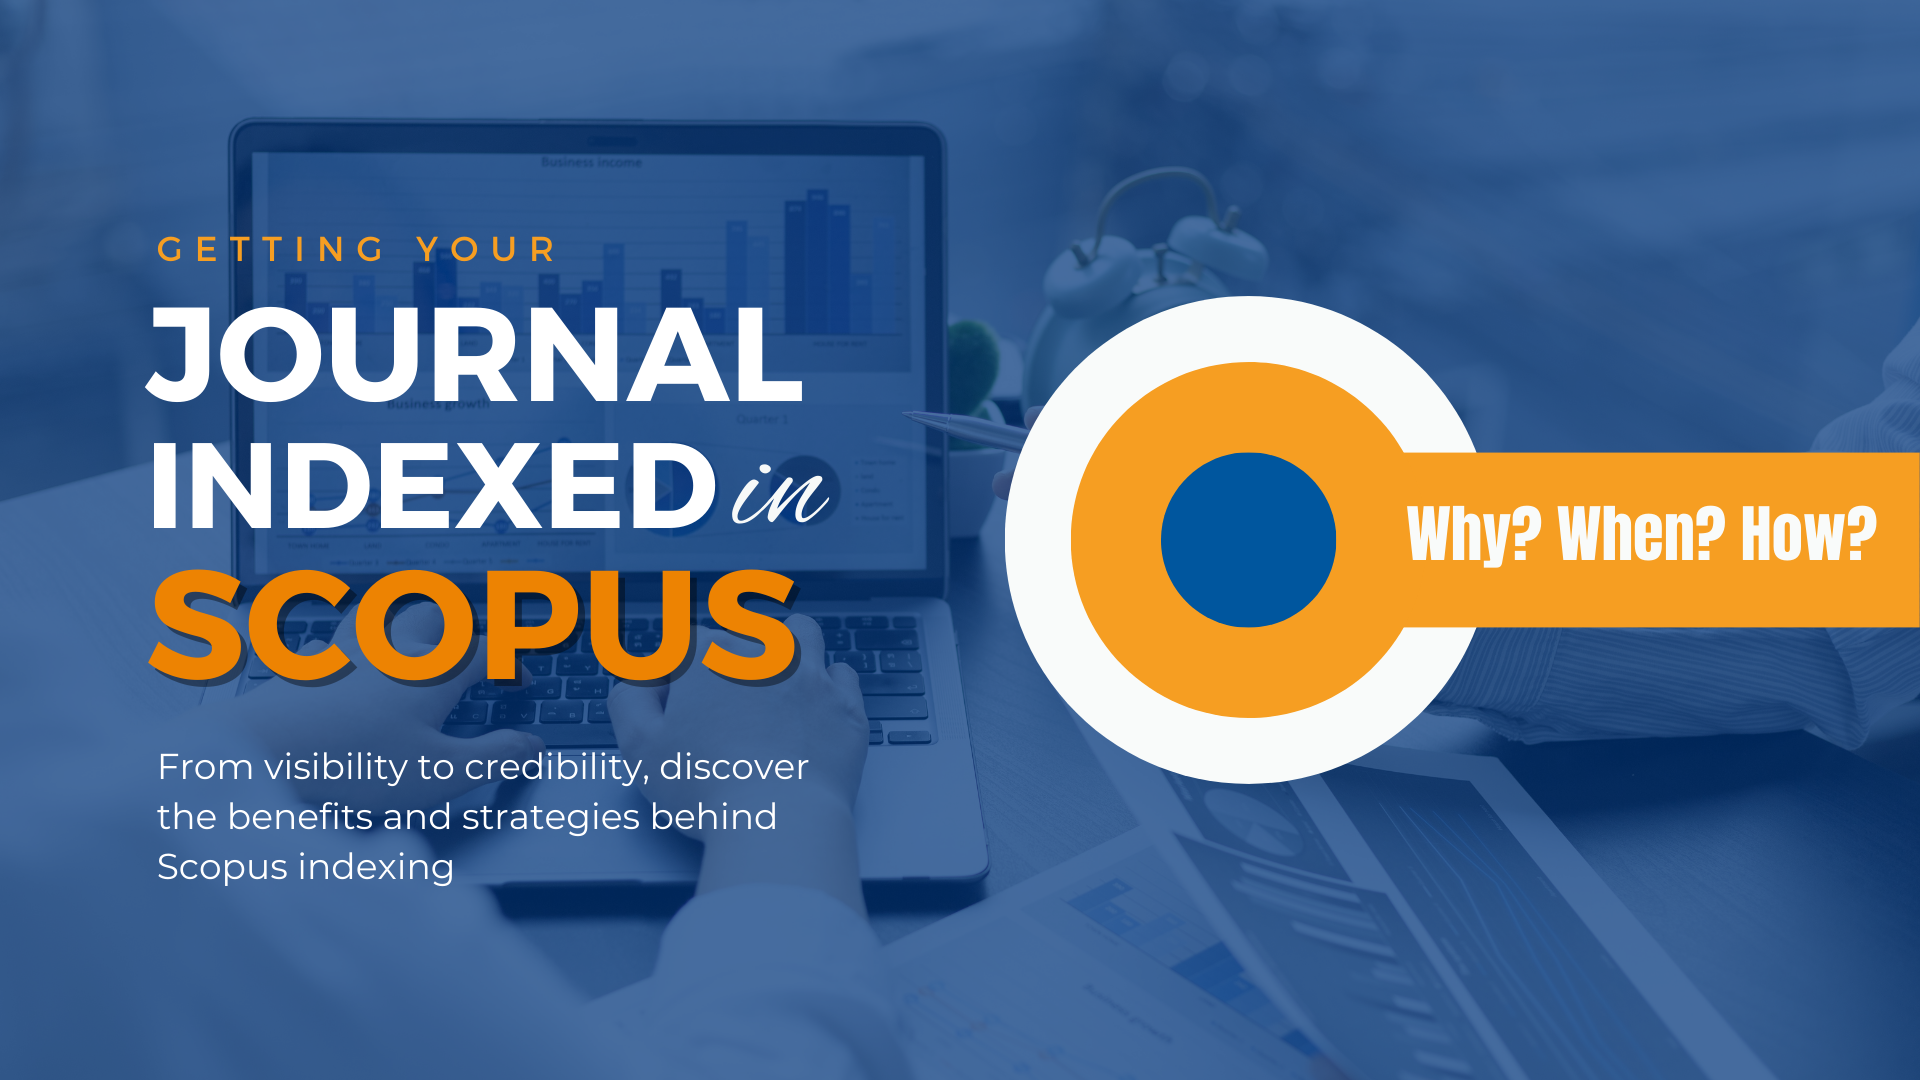 Getting Your Journal Indexed in Scopus: Why, When, and How